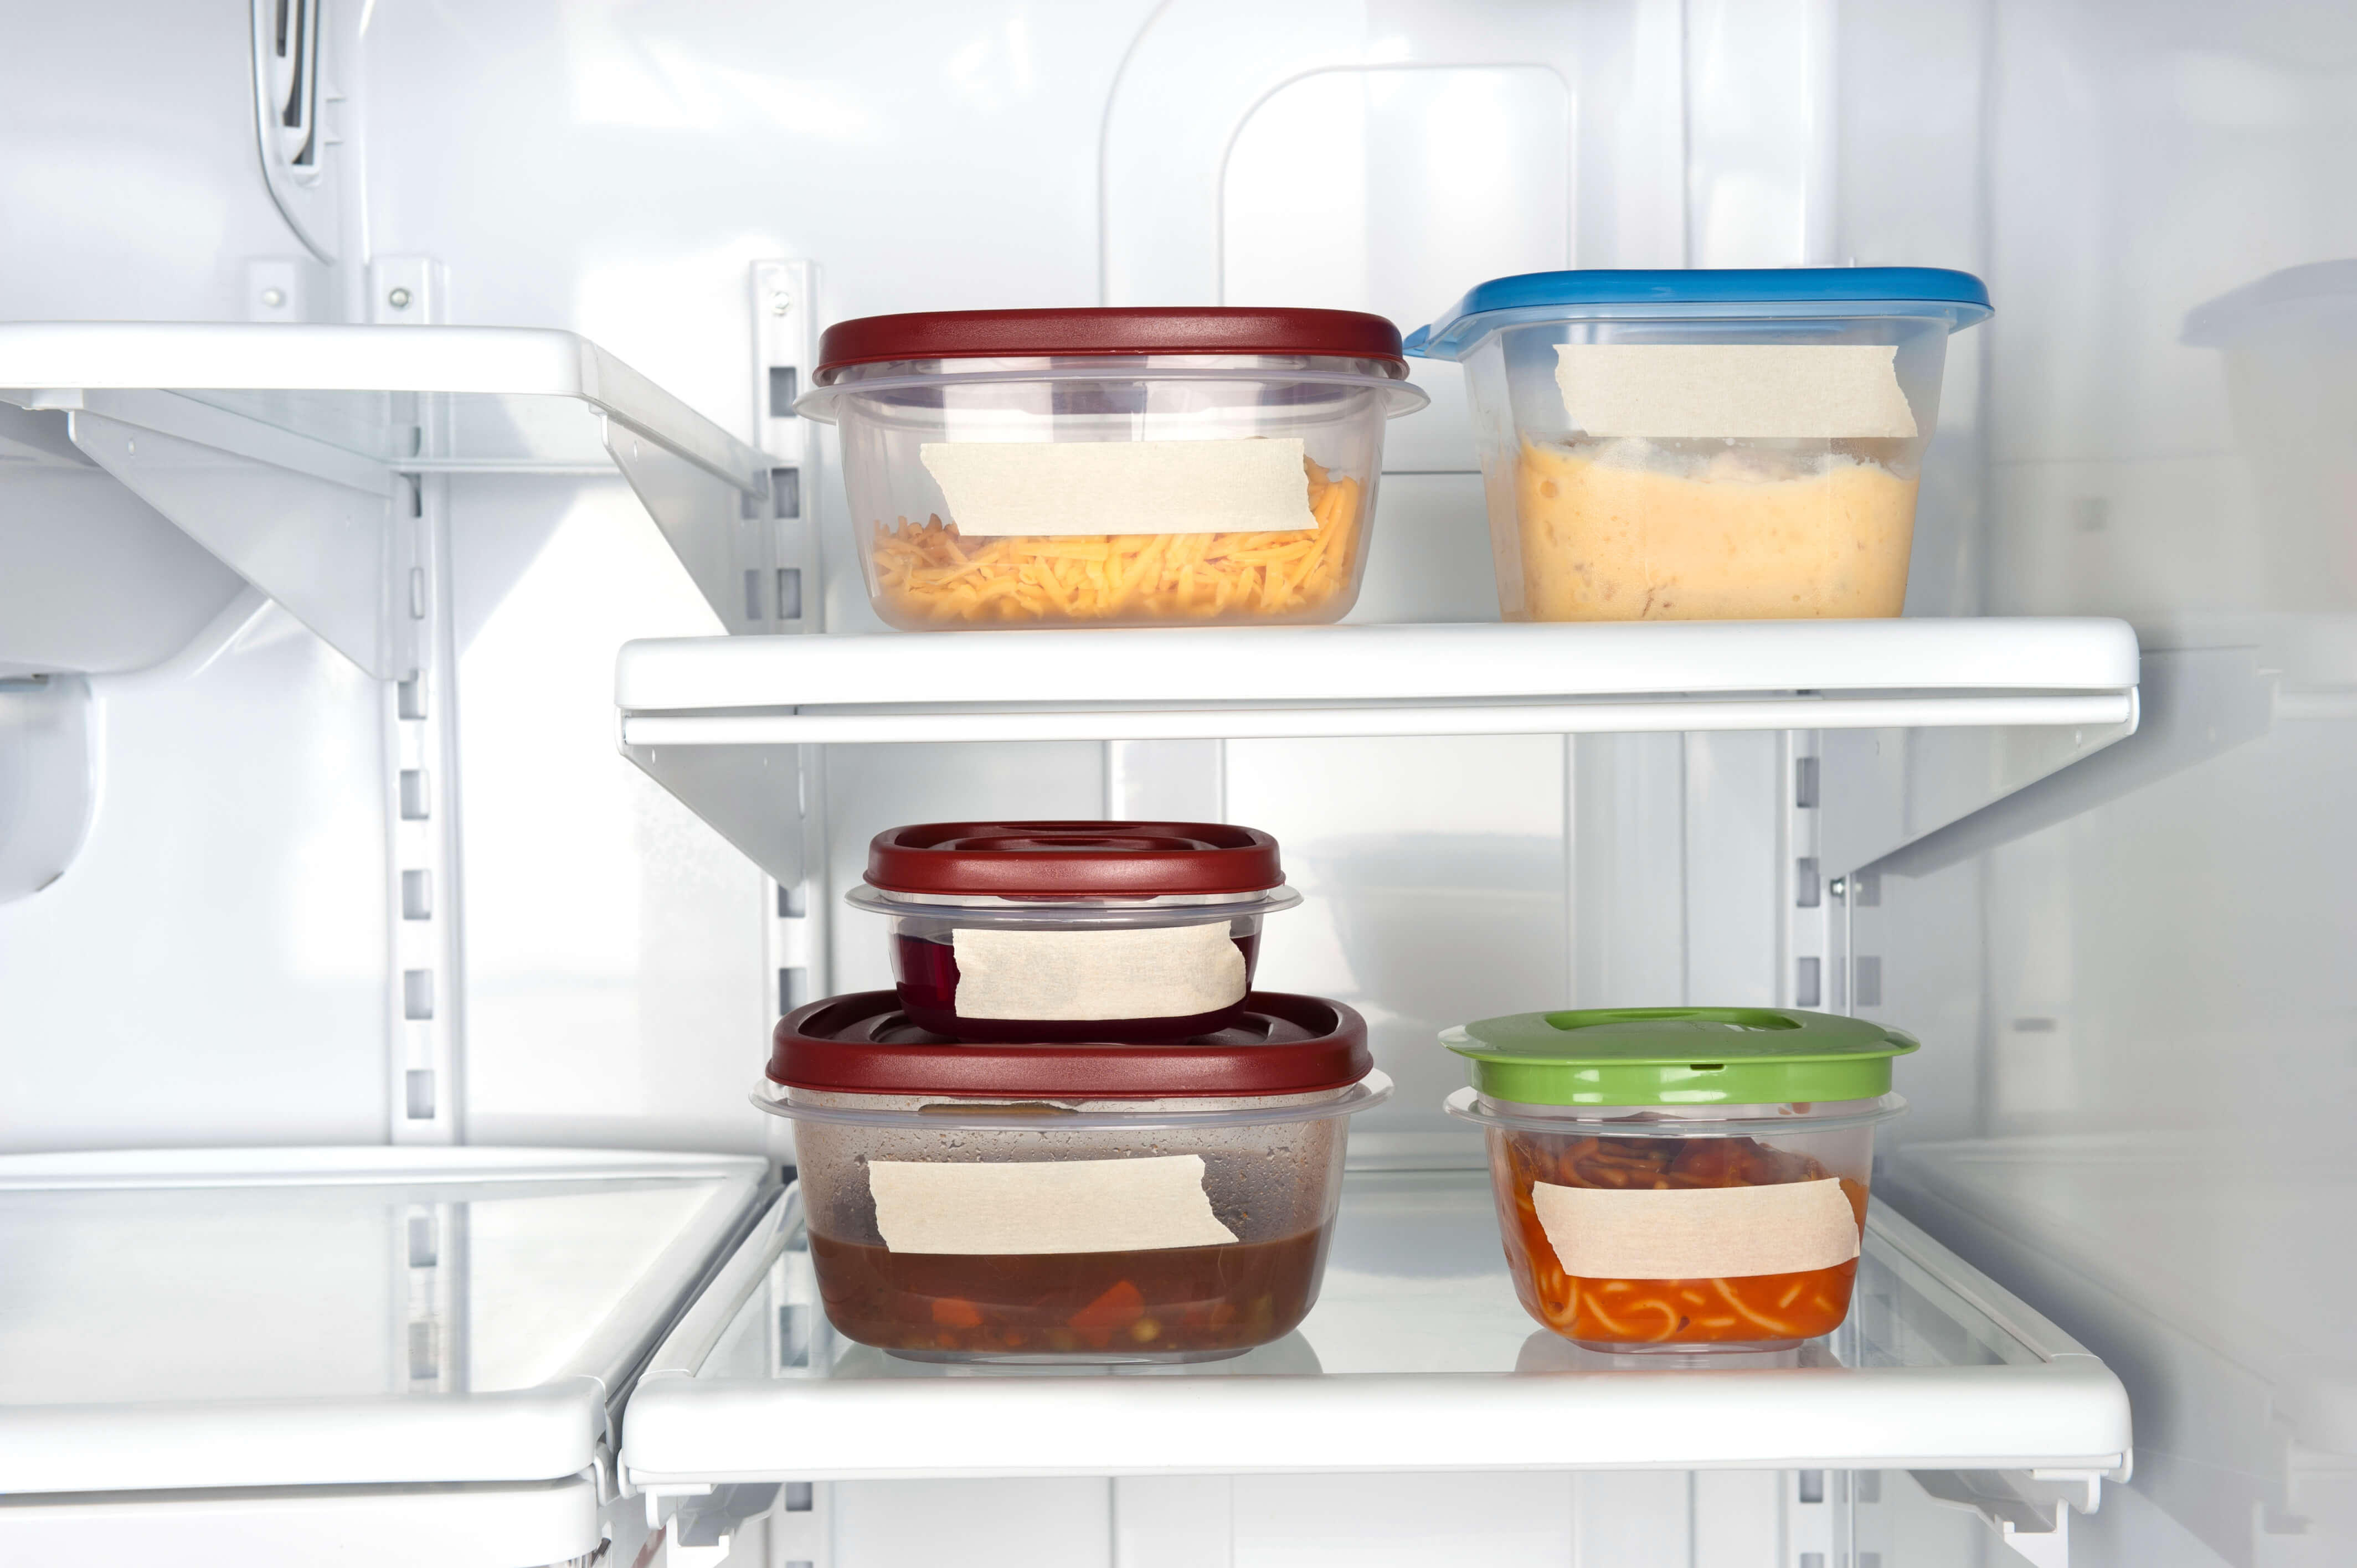 Perhaps the most important part of food storage is making sure you're using the proper tupperware.